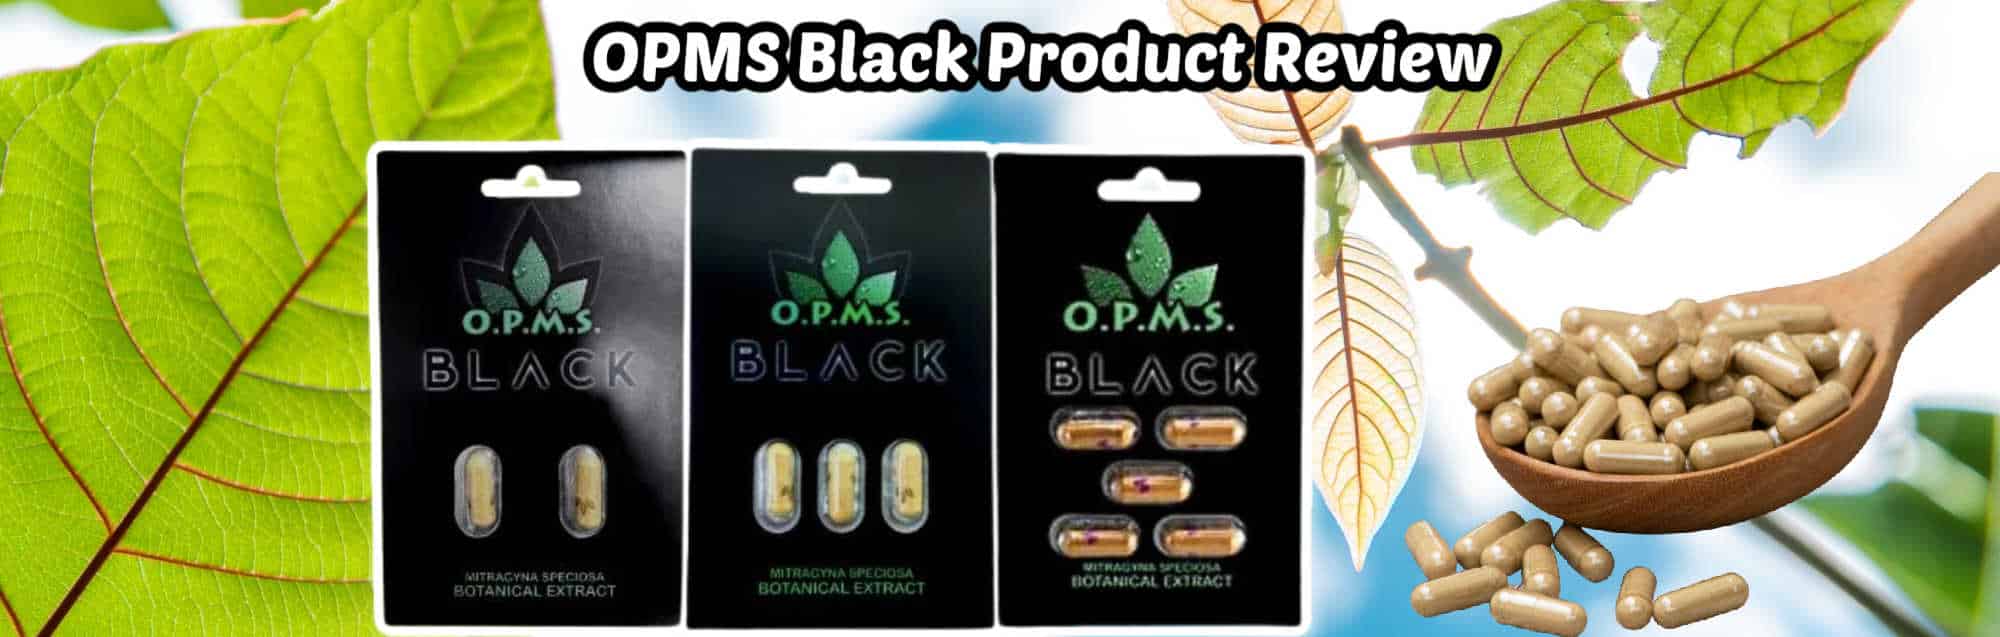 image of opms black product review